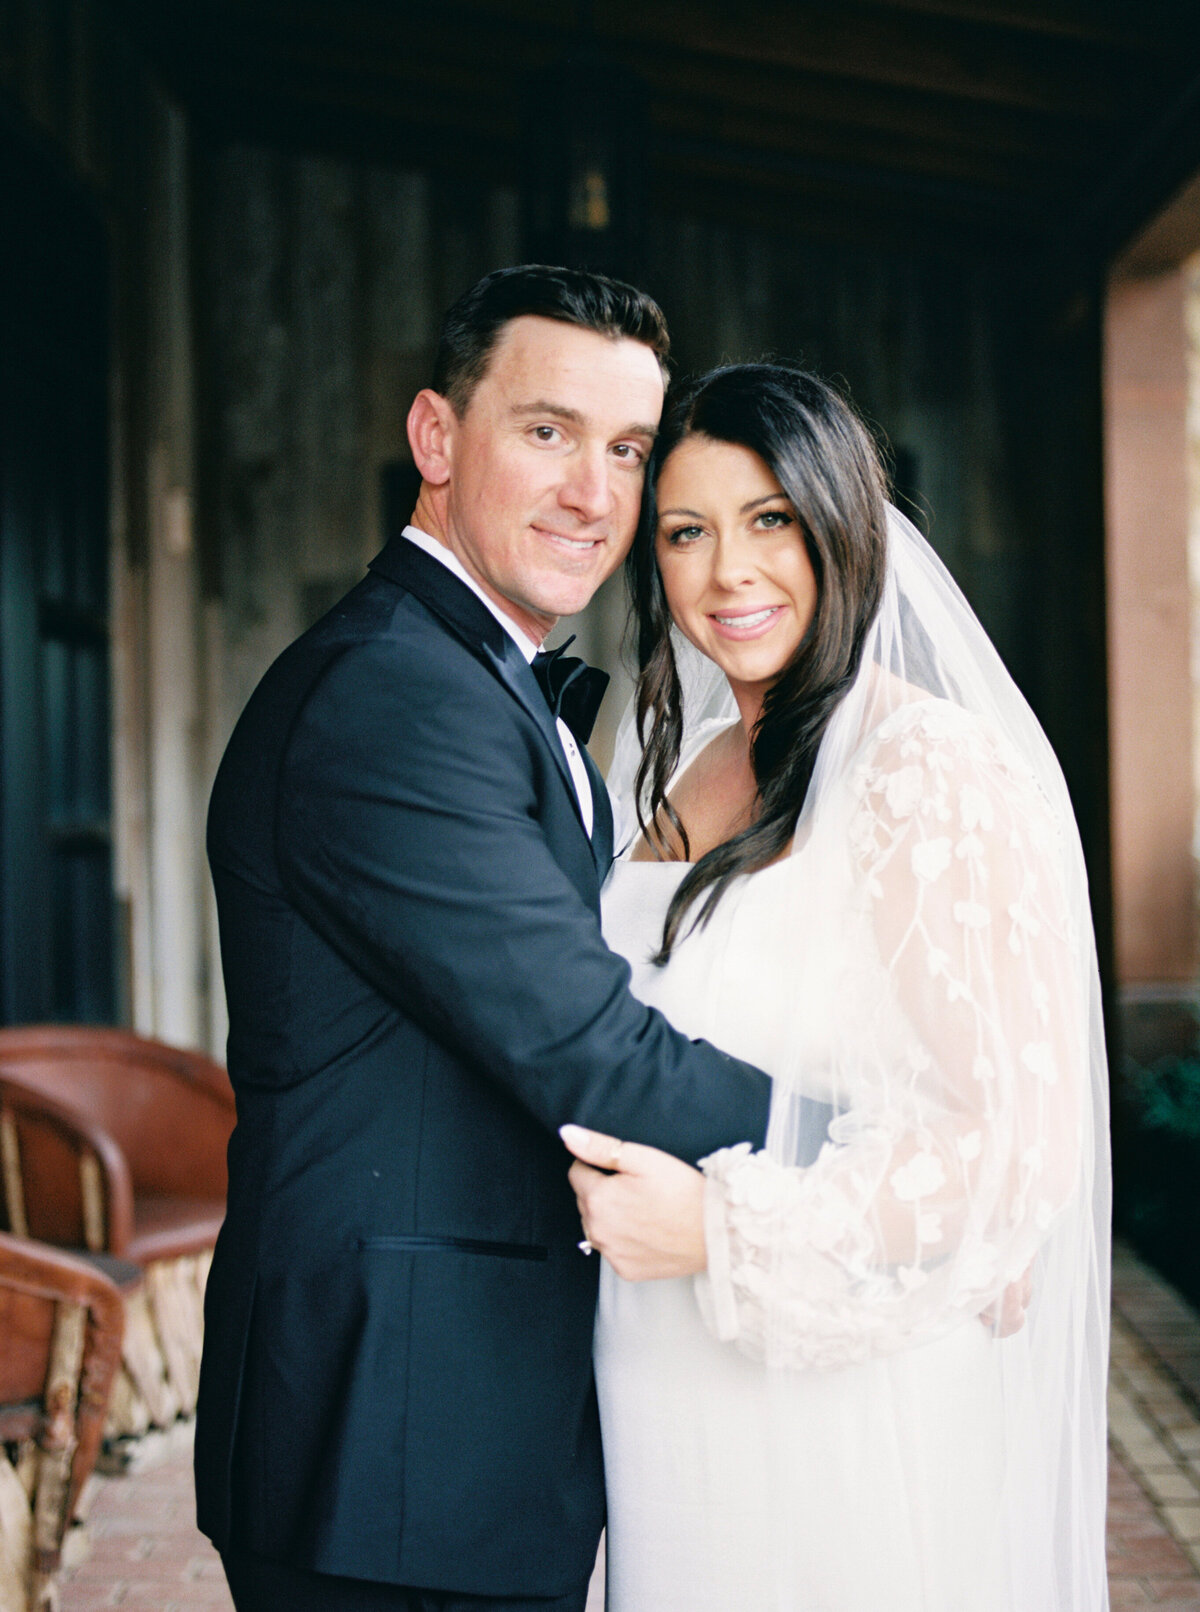 Hotel Drover - Fort Worth Texas - Lauren and Jeff Murray - Stephanie Michelle Photography @stephaniemichellephotog-01